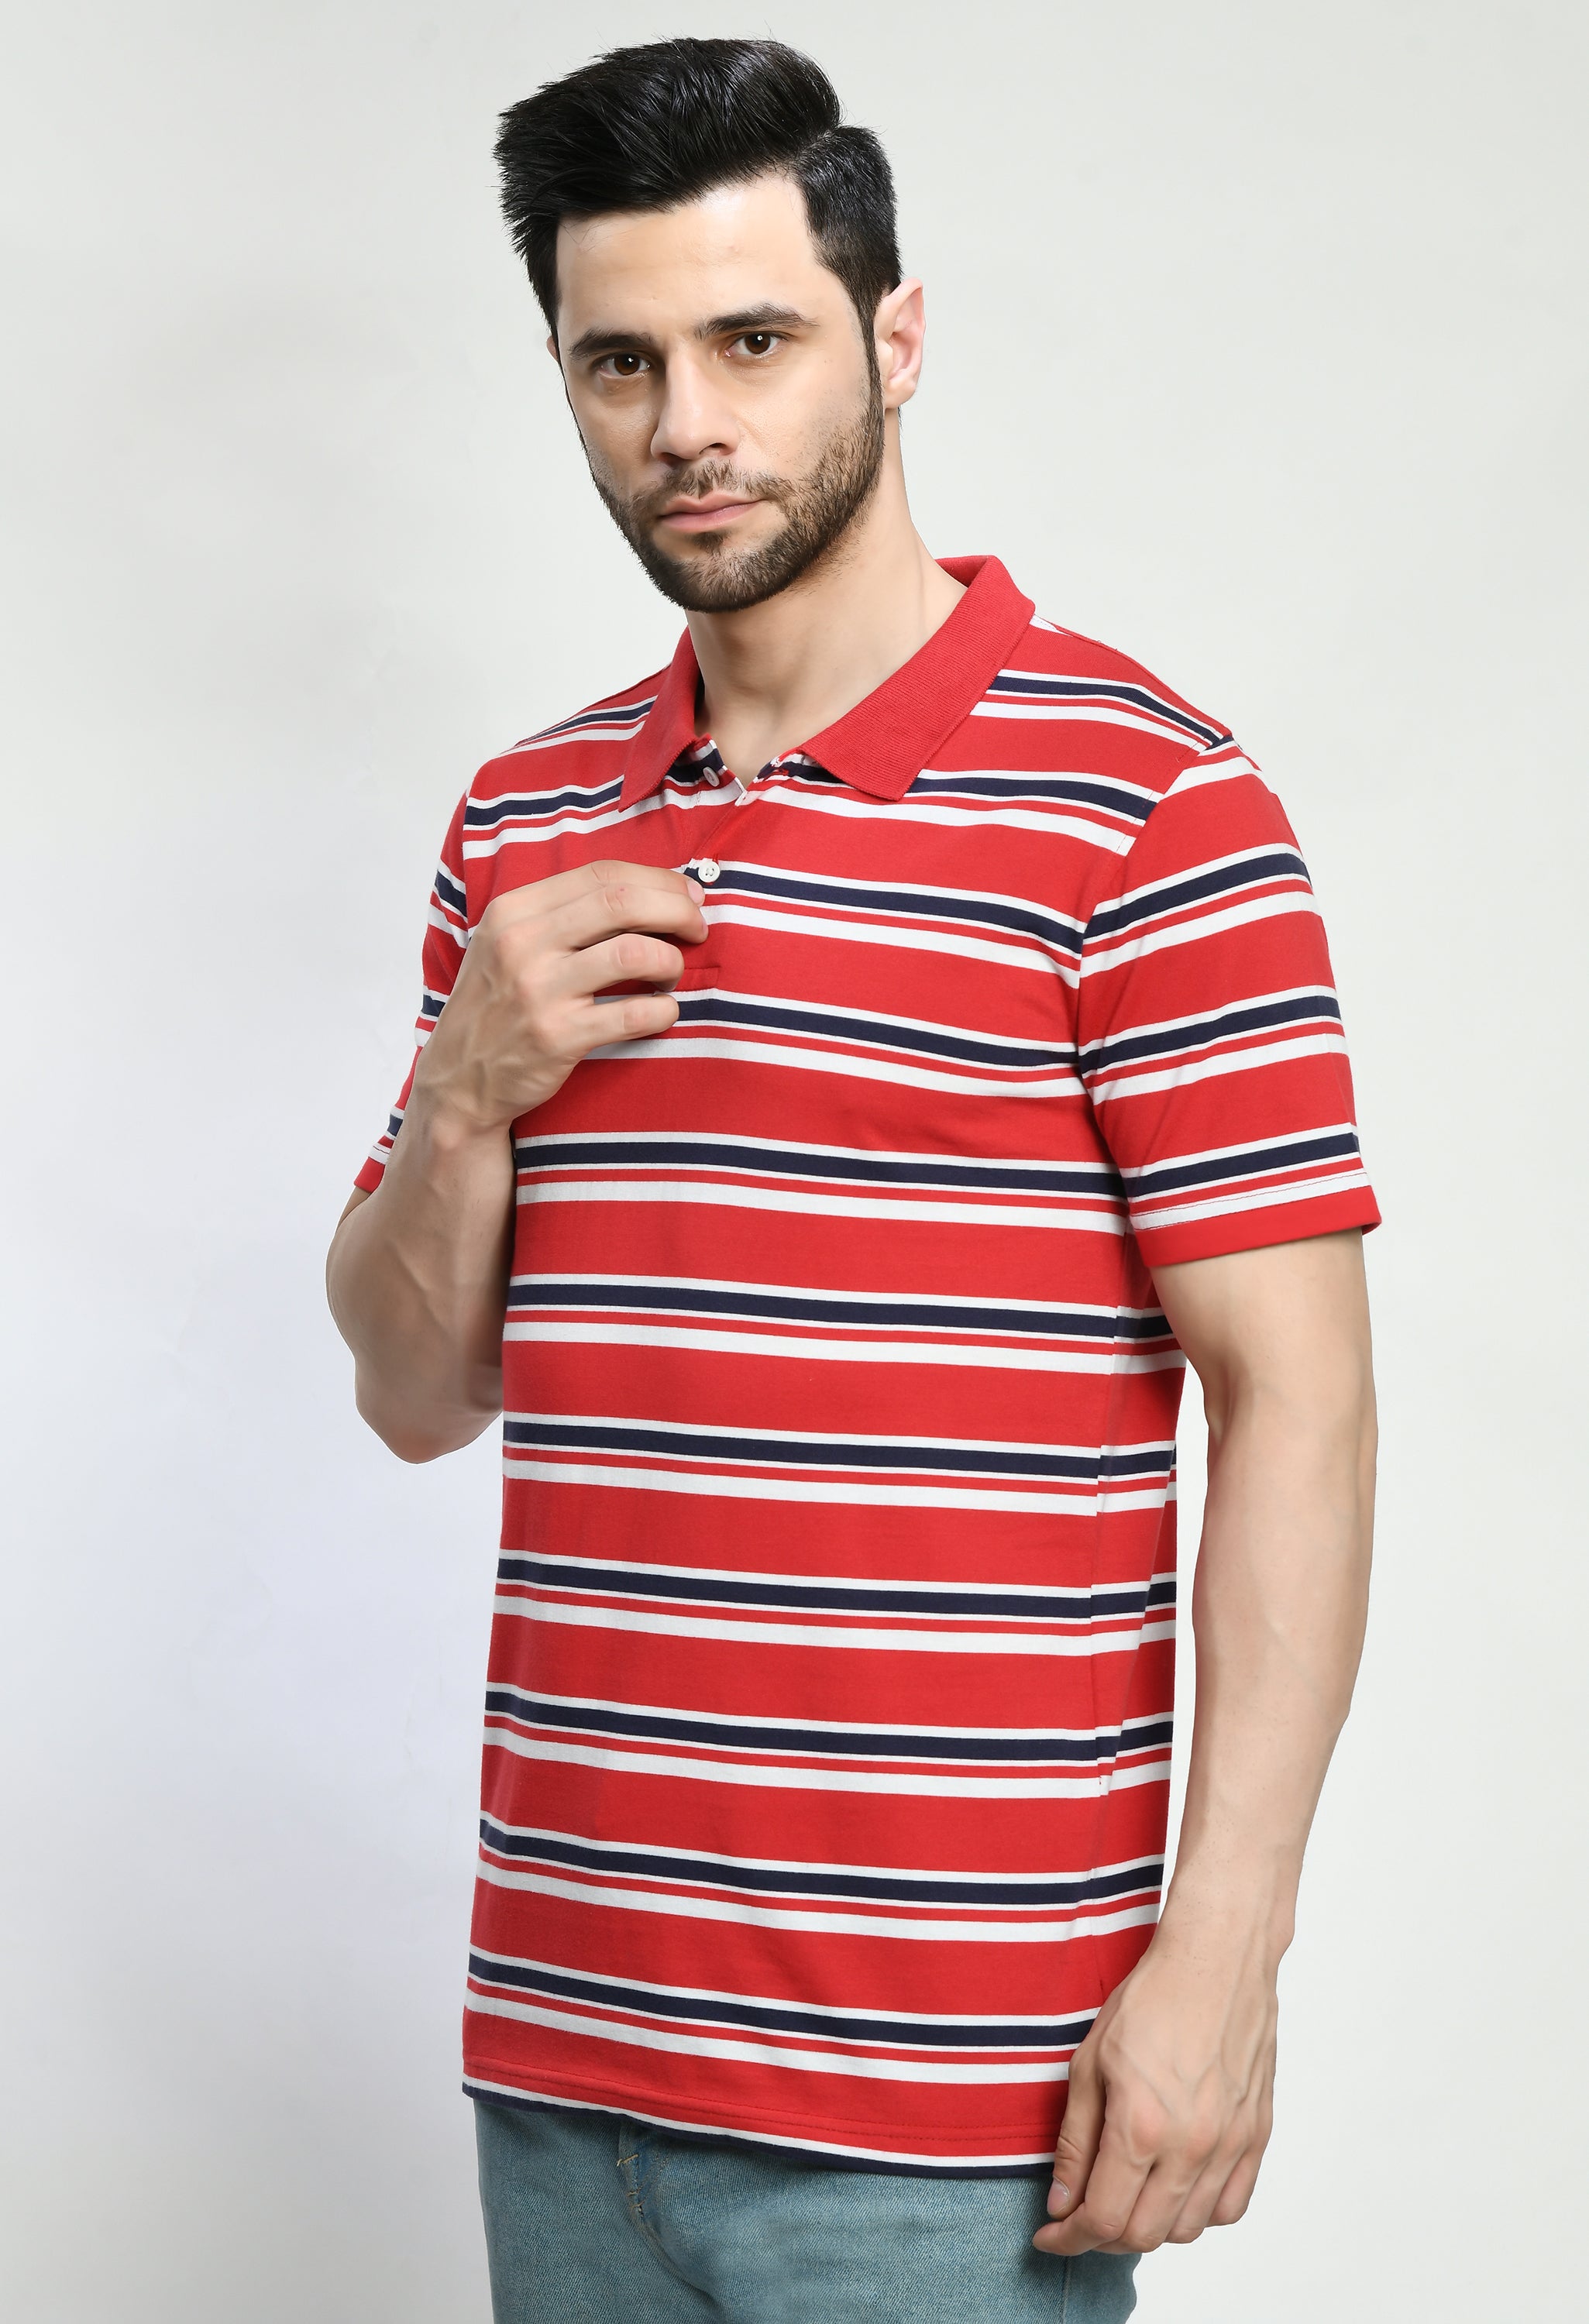 Multi Striped Printed Polo T-shirt For Men's